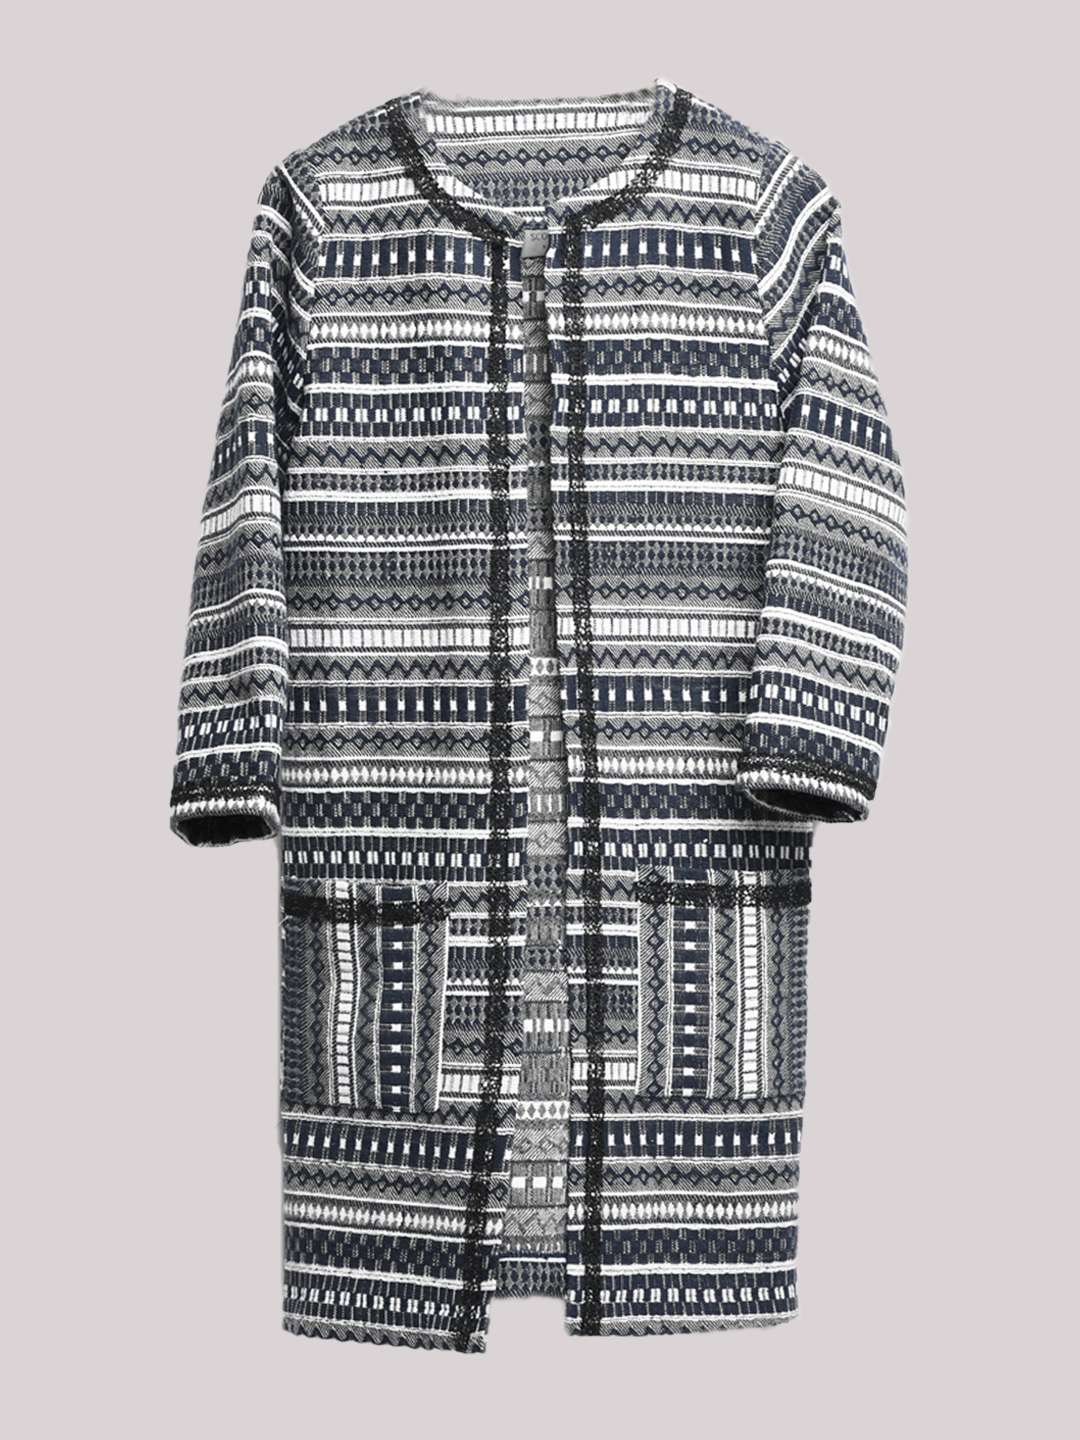 Cotton Jacquard Mid Length Over Coat